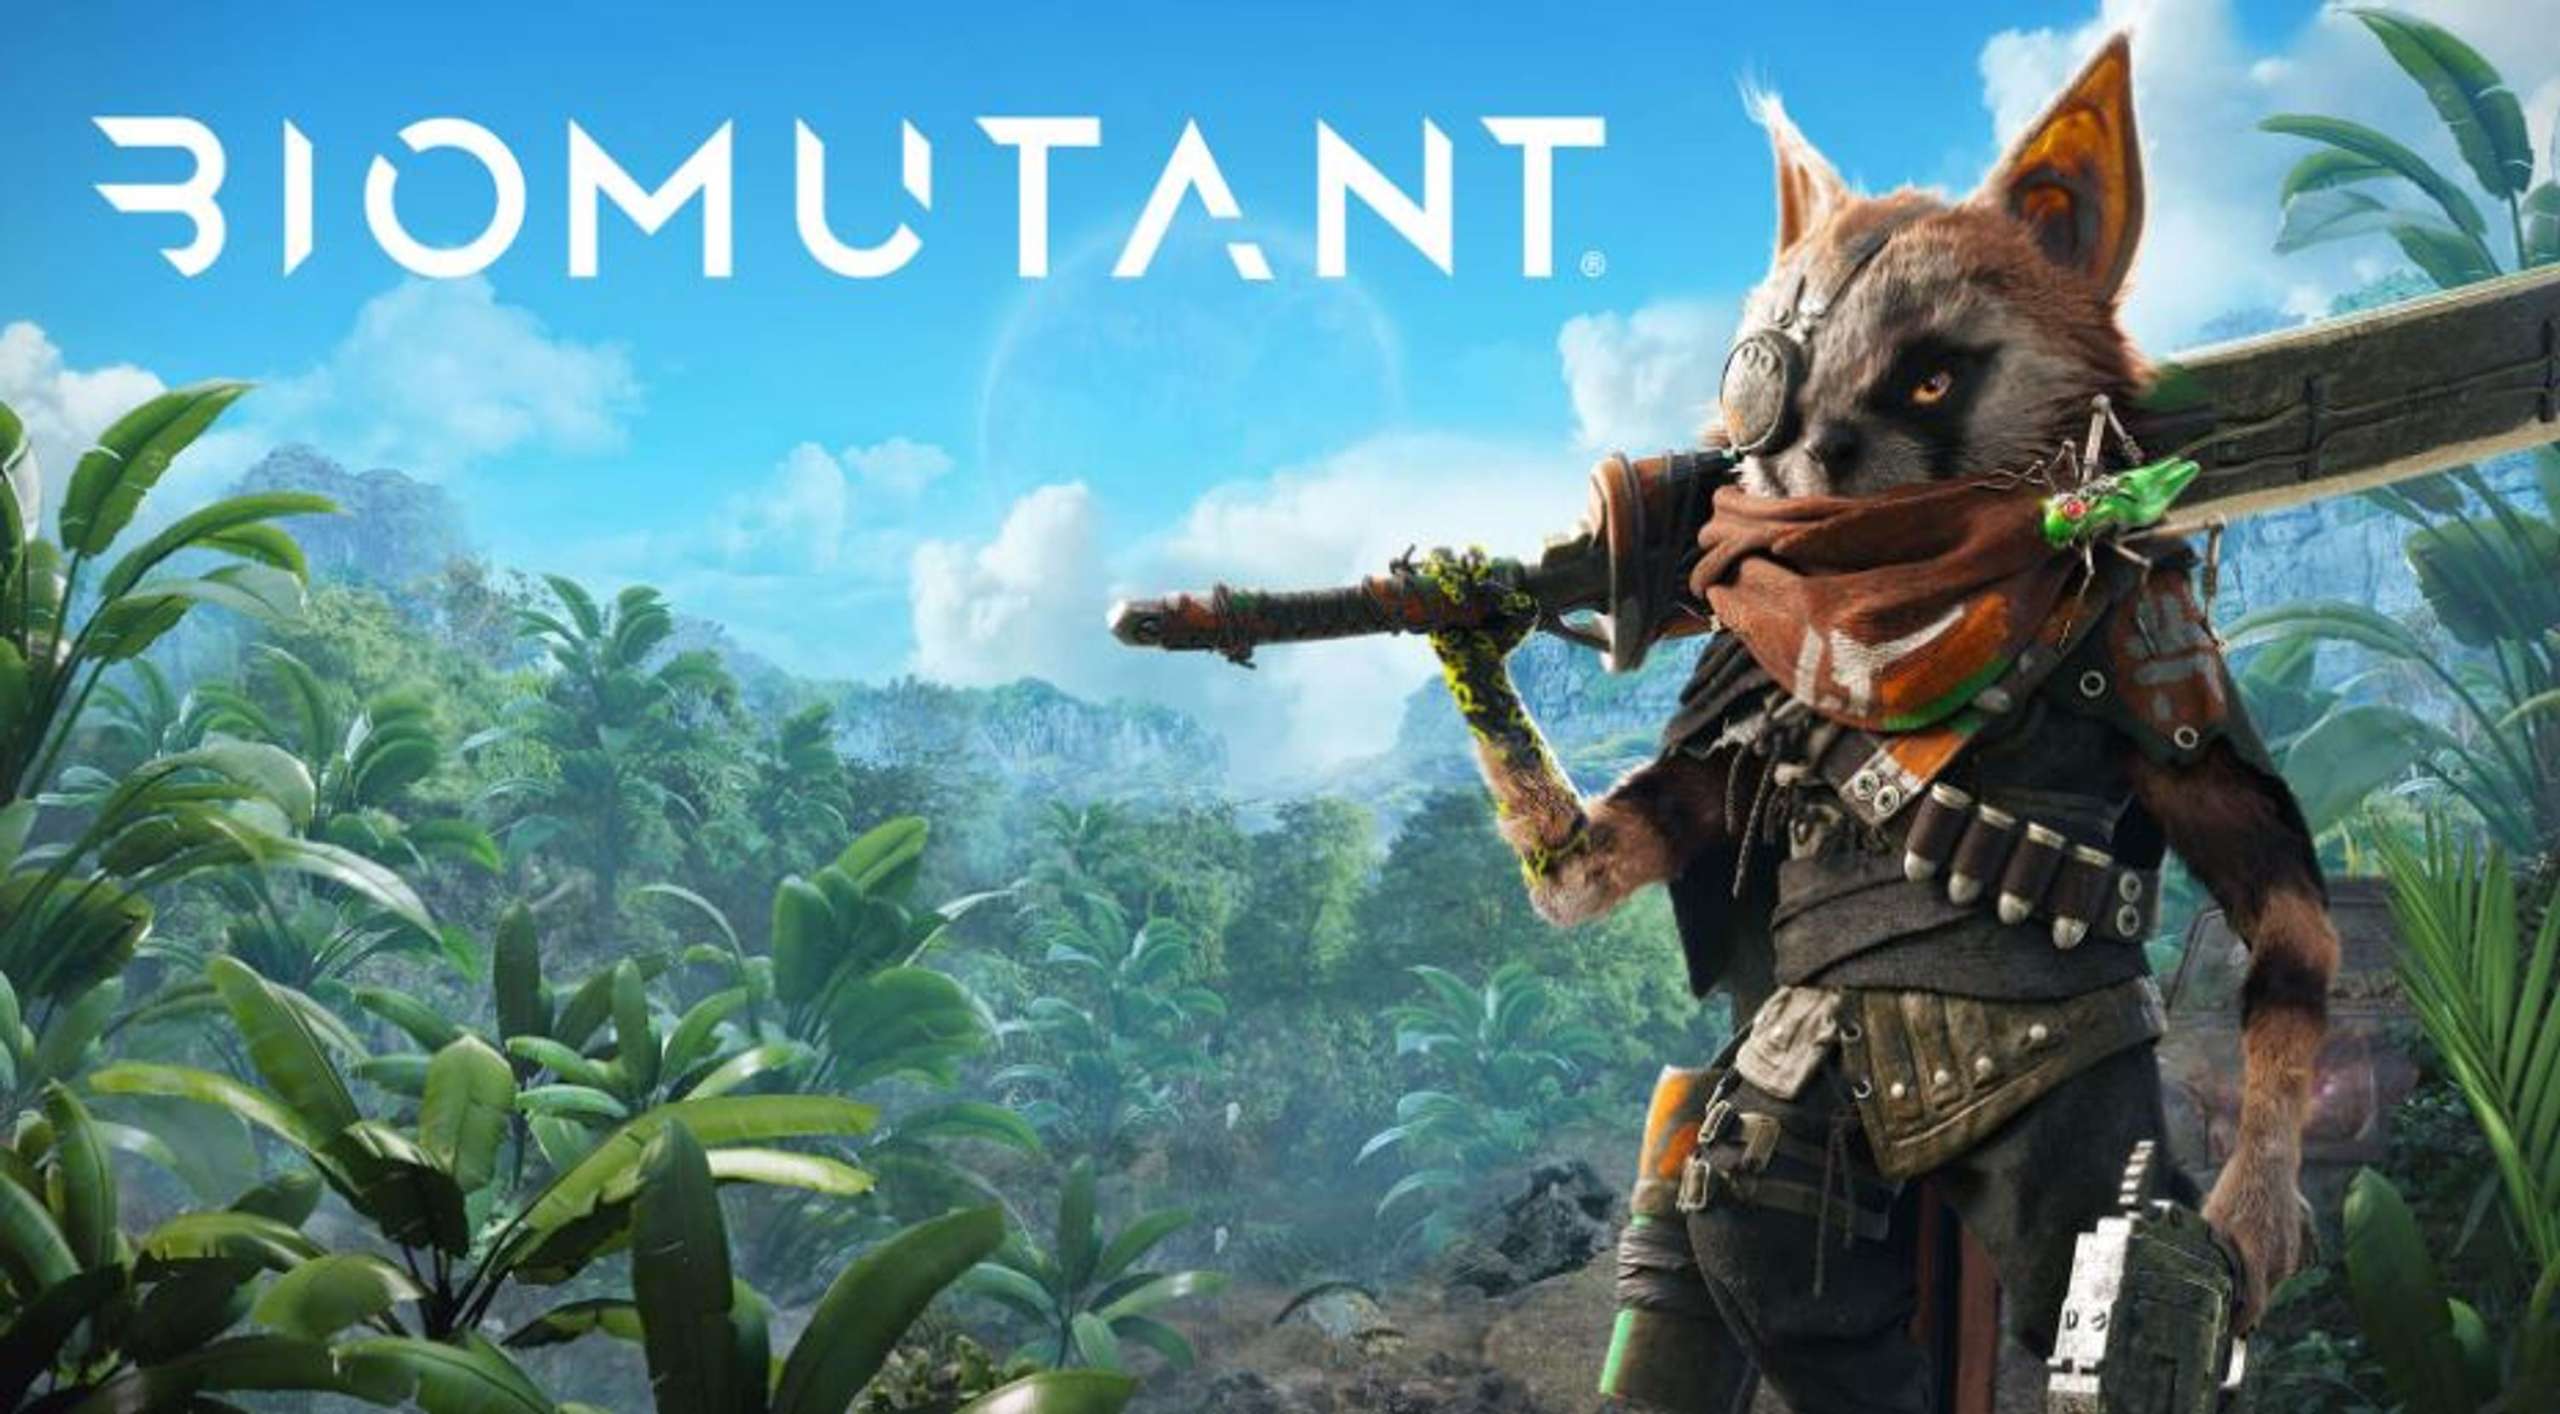 Biomutant Coming September 6 to PlayStation 5 and Xbox Series X|S – Trailer And New Version Details